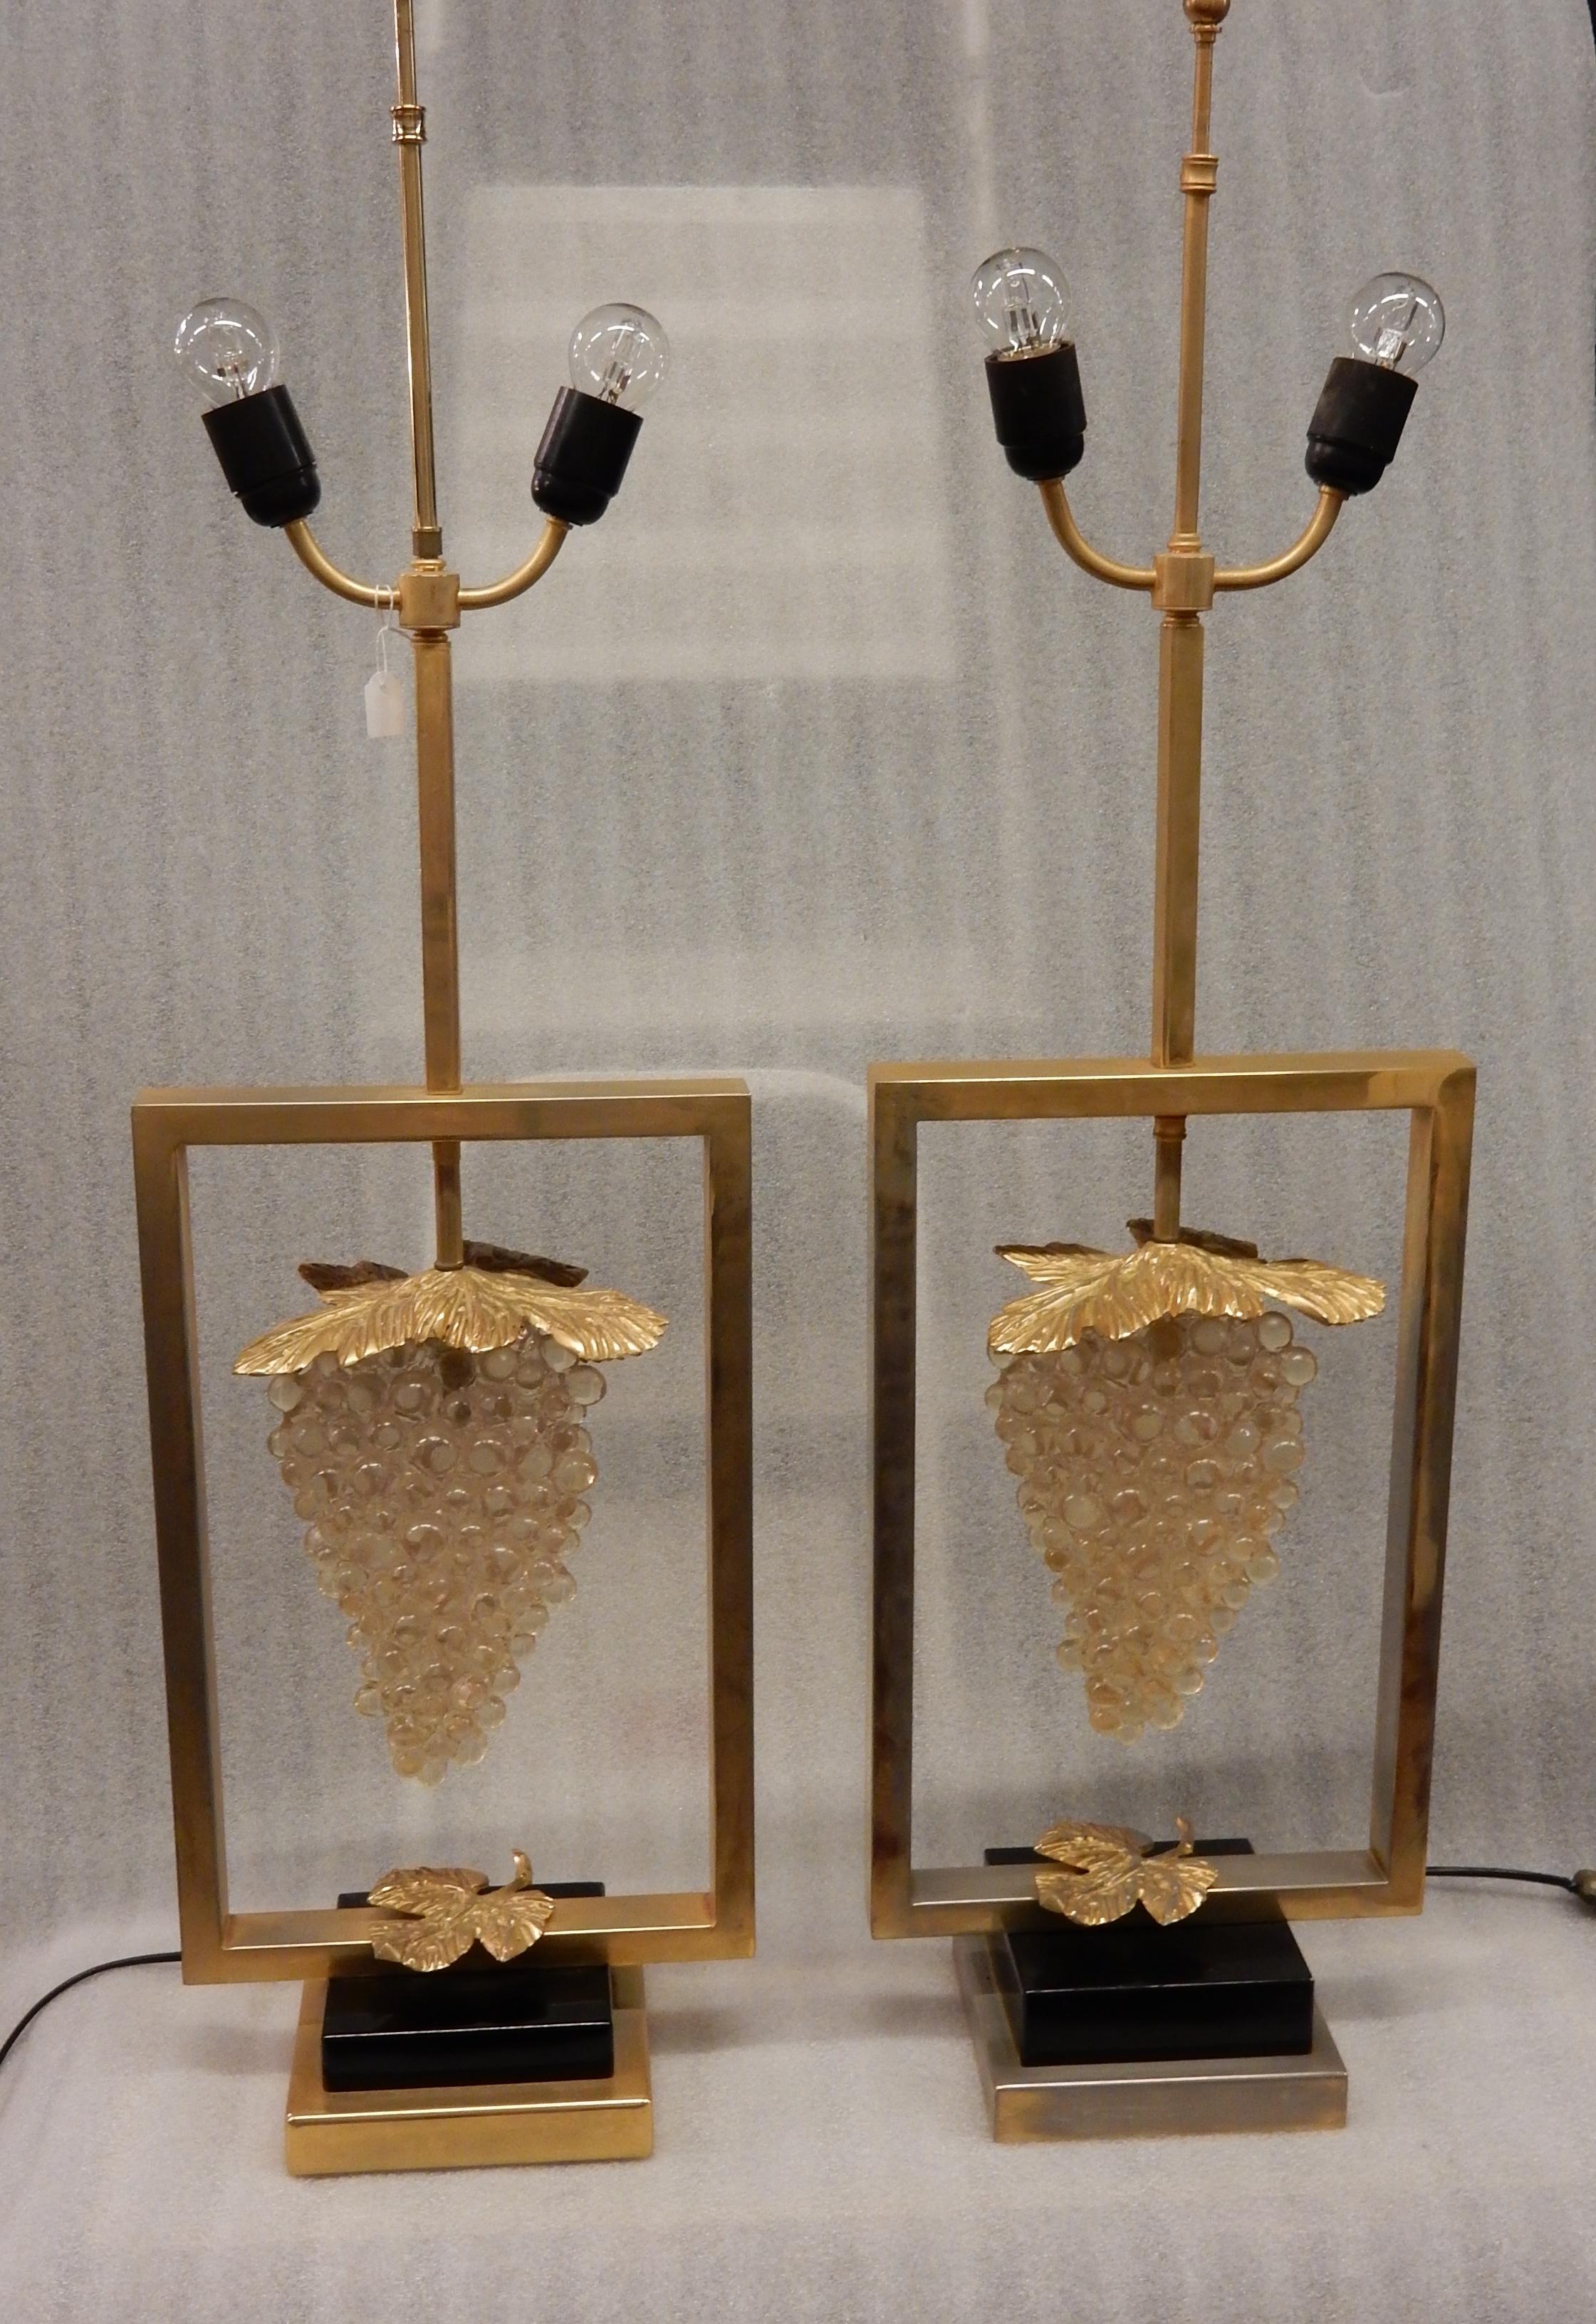 Pair of lamps or similar in gilded iron, Lucite and gilted metal, condition of use ,the gilt not shining a little worn in places, 2 bulbs, circa 1970
the height is adjusted by a dial
Measures: Length: 17 cm
Width: 28 cm
Height: 92 cm
Depth: 17